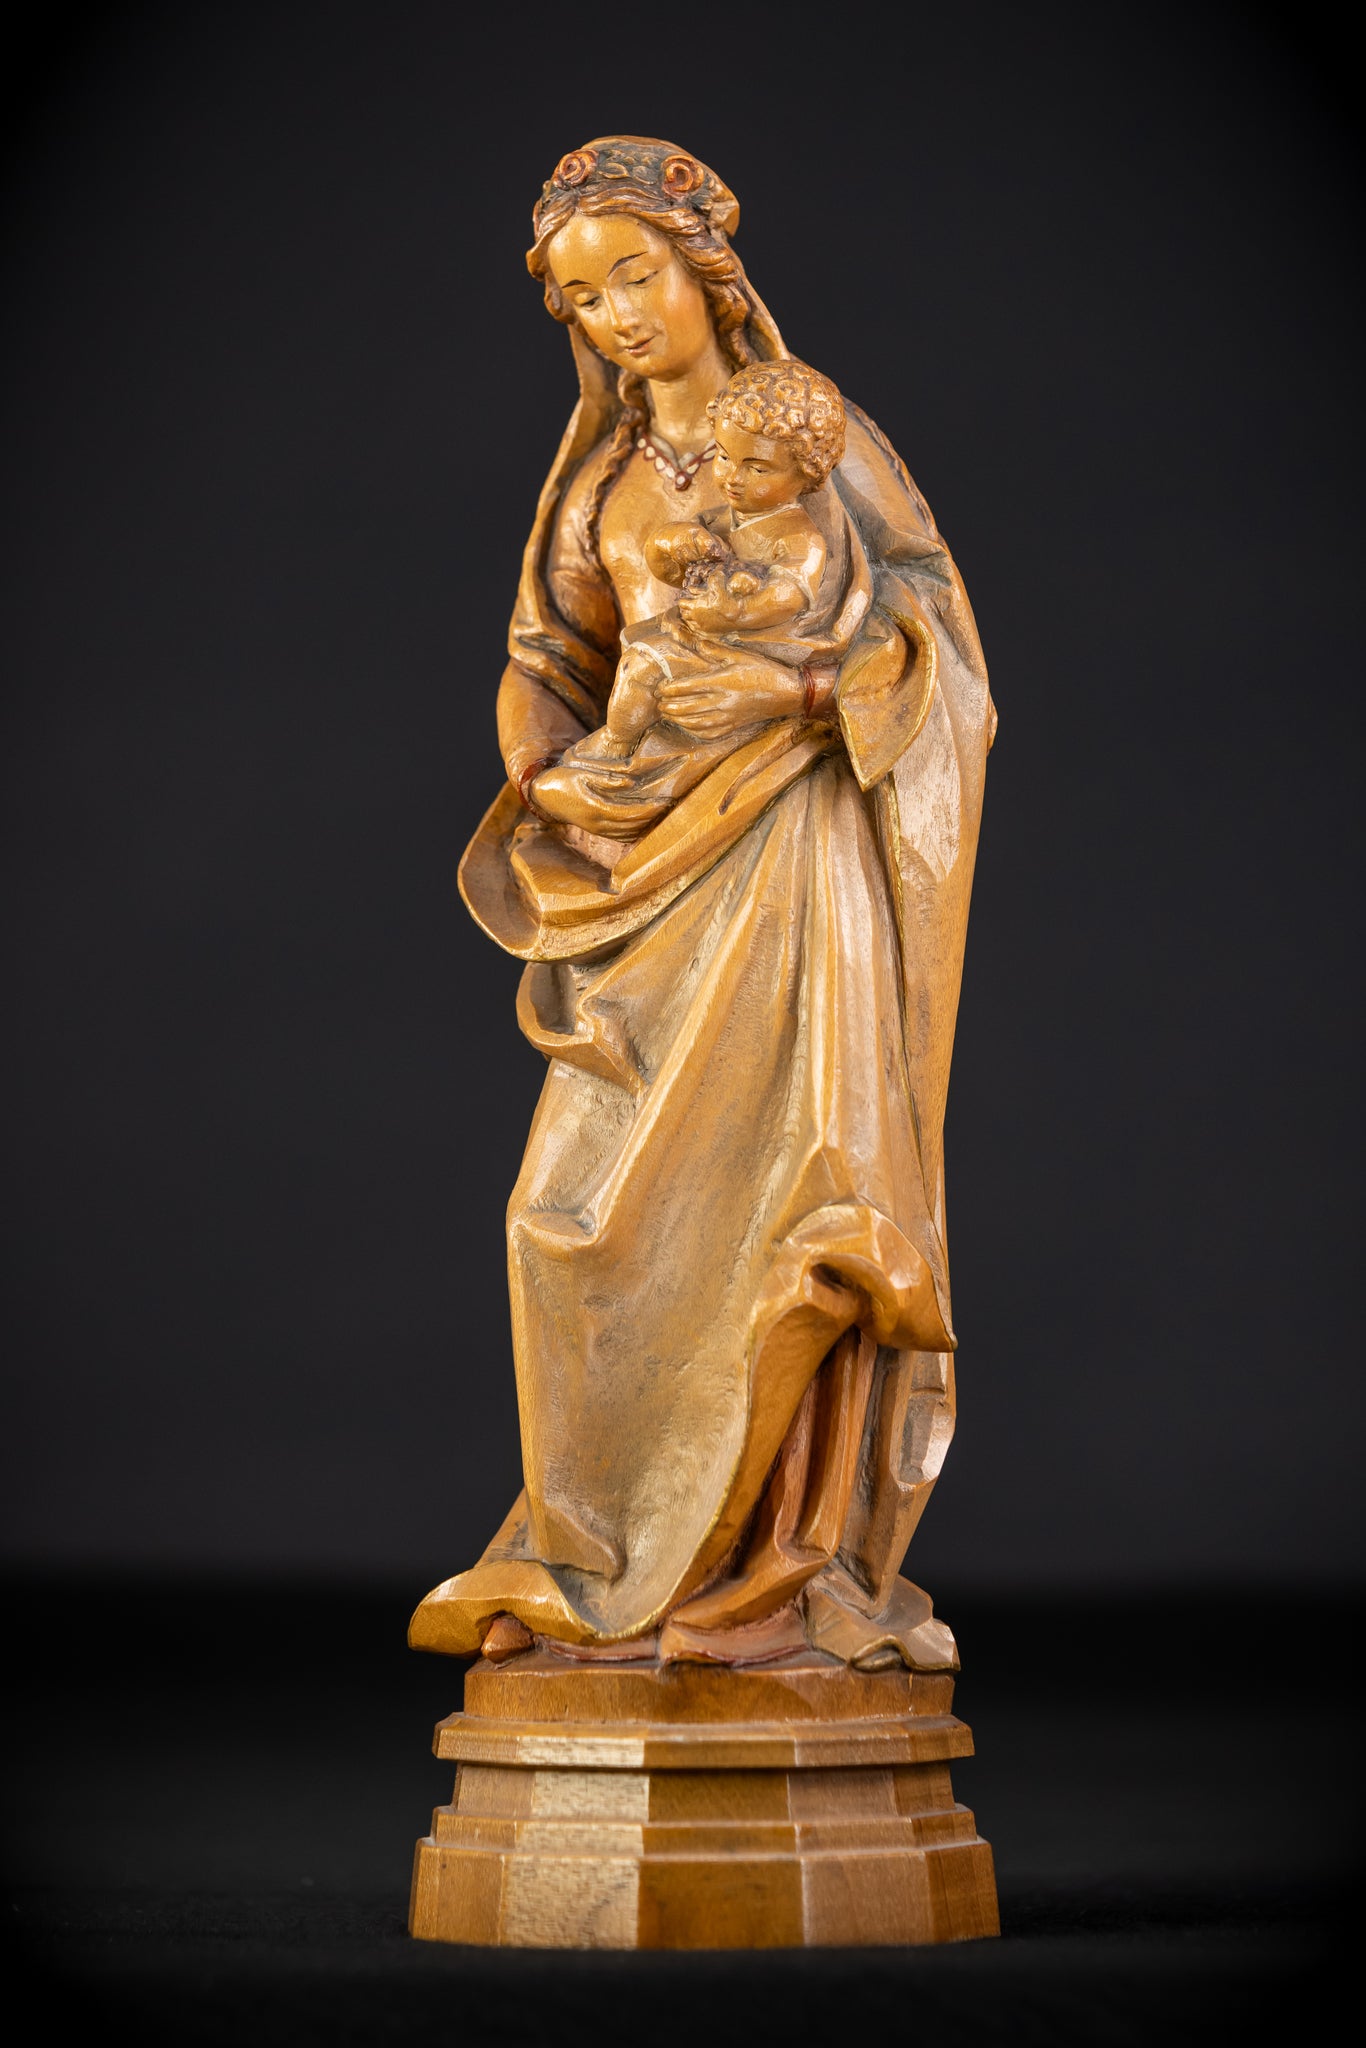 Virgin Mary with Child Jesus Wooden Sculpture | Mid 1900s Vintage | 11” / 28 cm